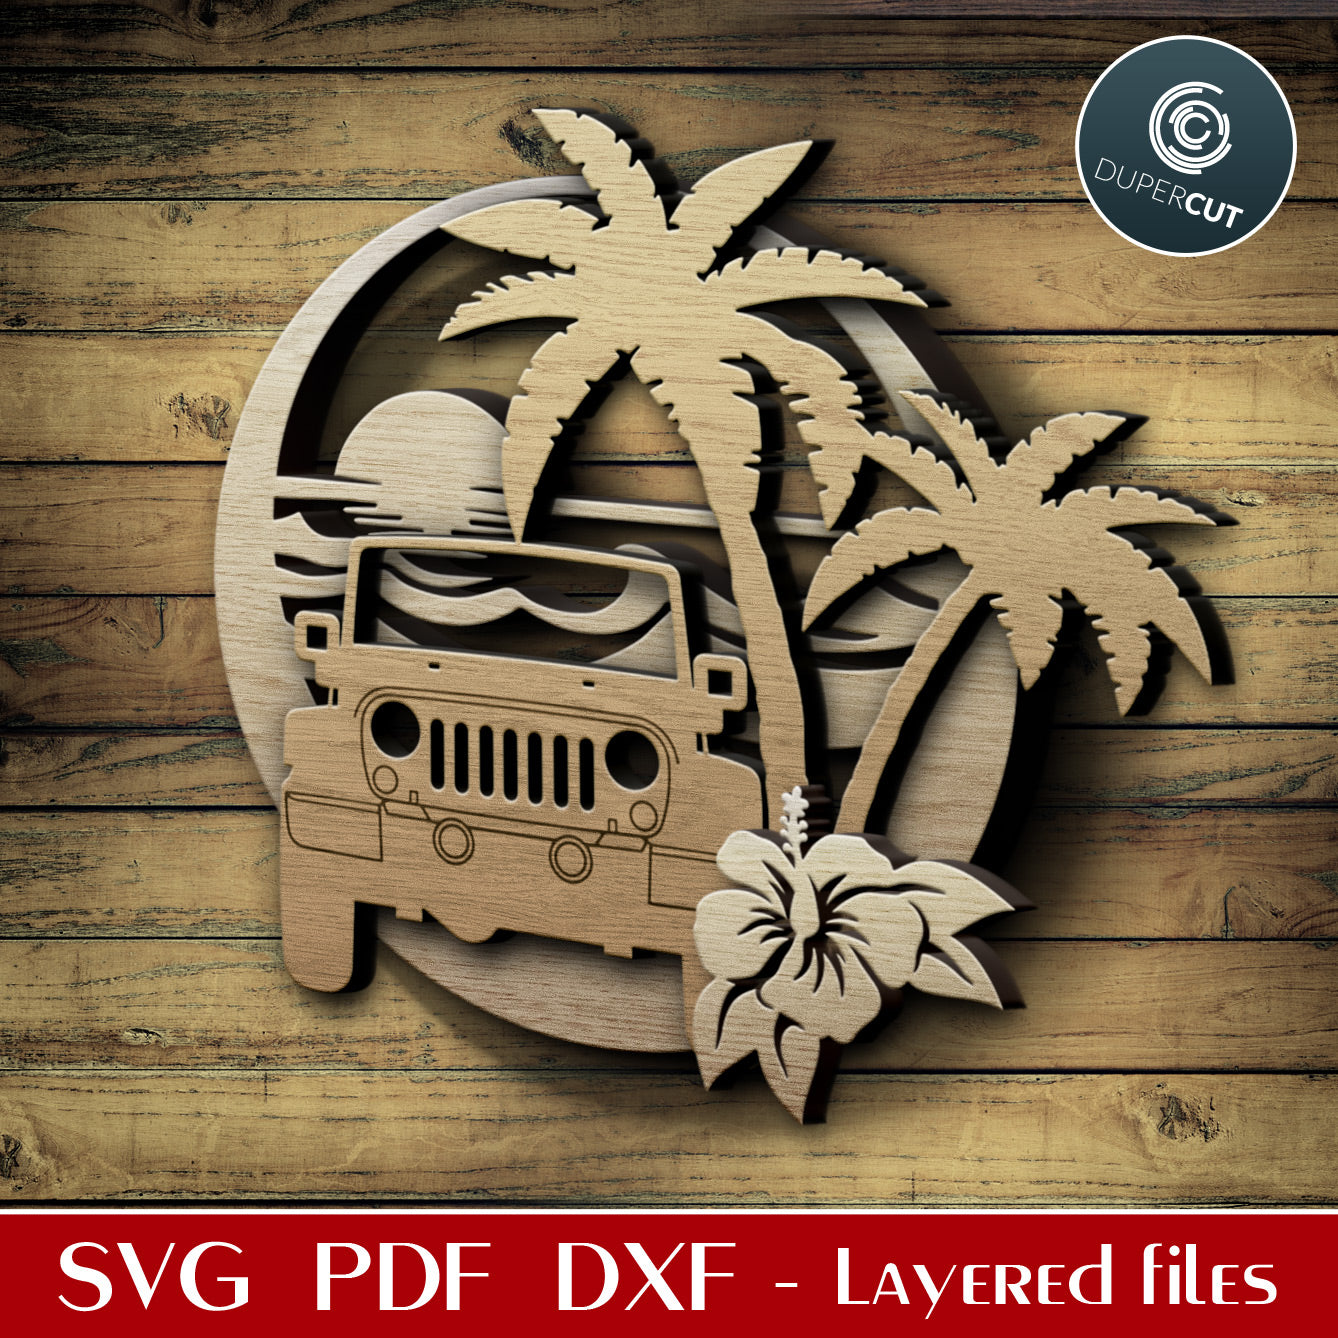 Tropical Jeep scene with hibiscus - layered cutting files - SVG PDF DXF vector template for Glowforge, laser cutters, Cricut, Silhouette Cameo